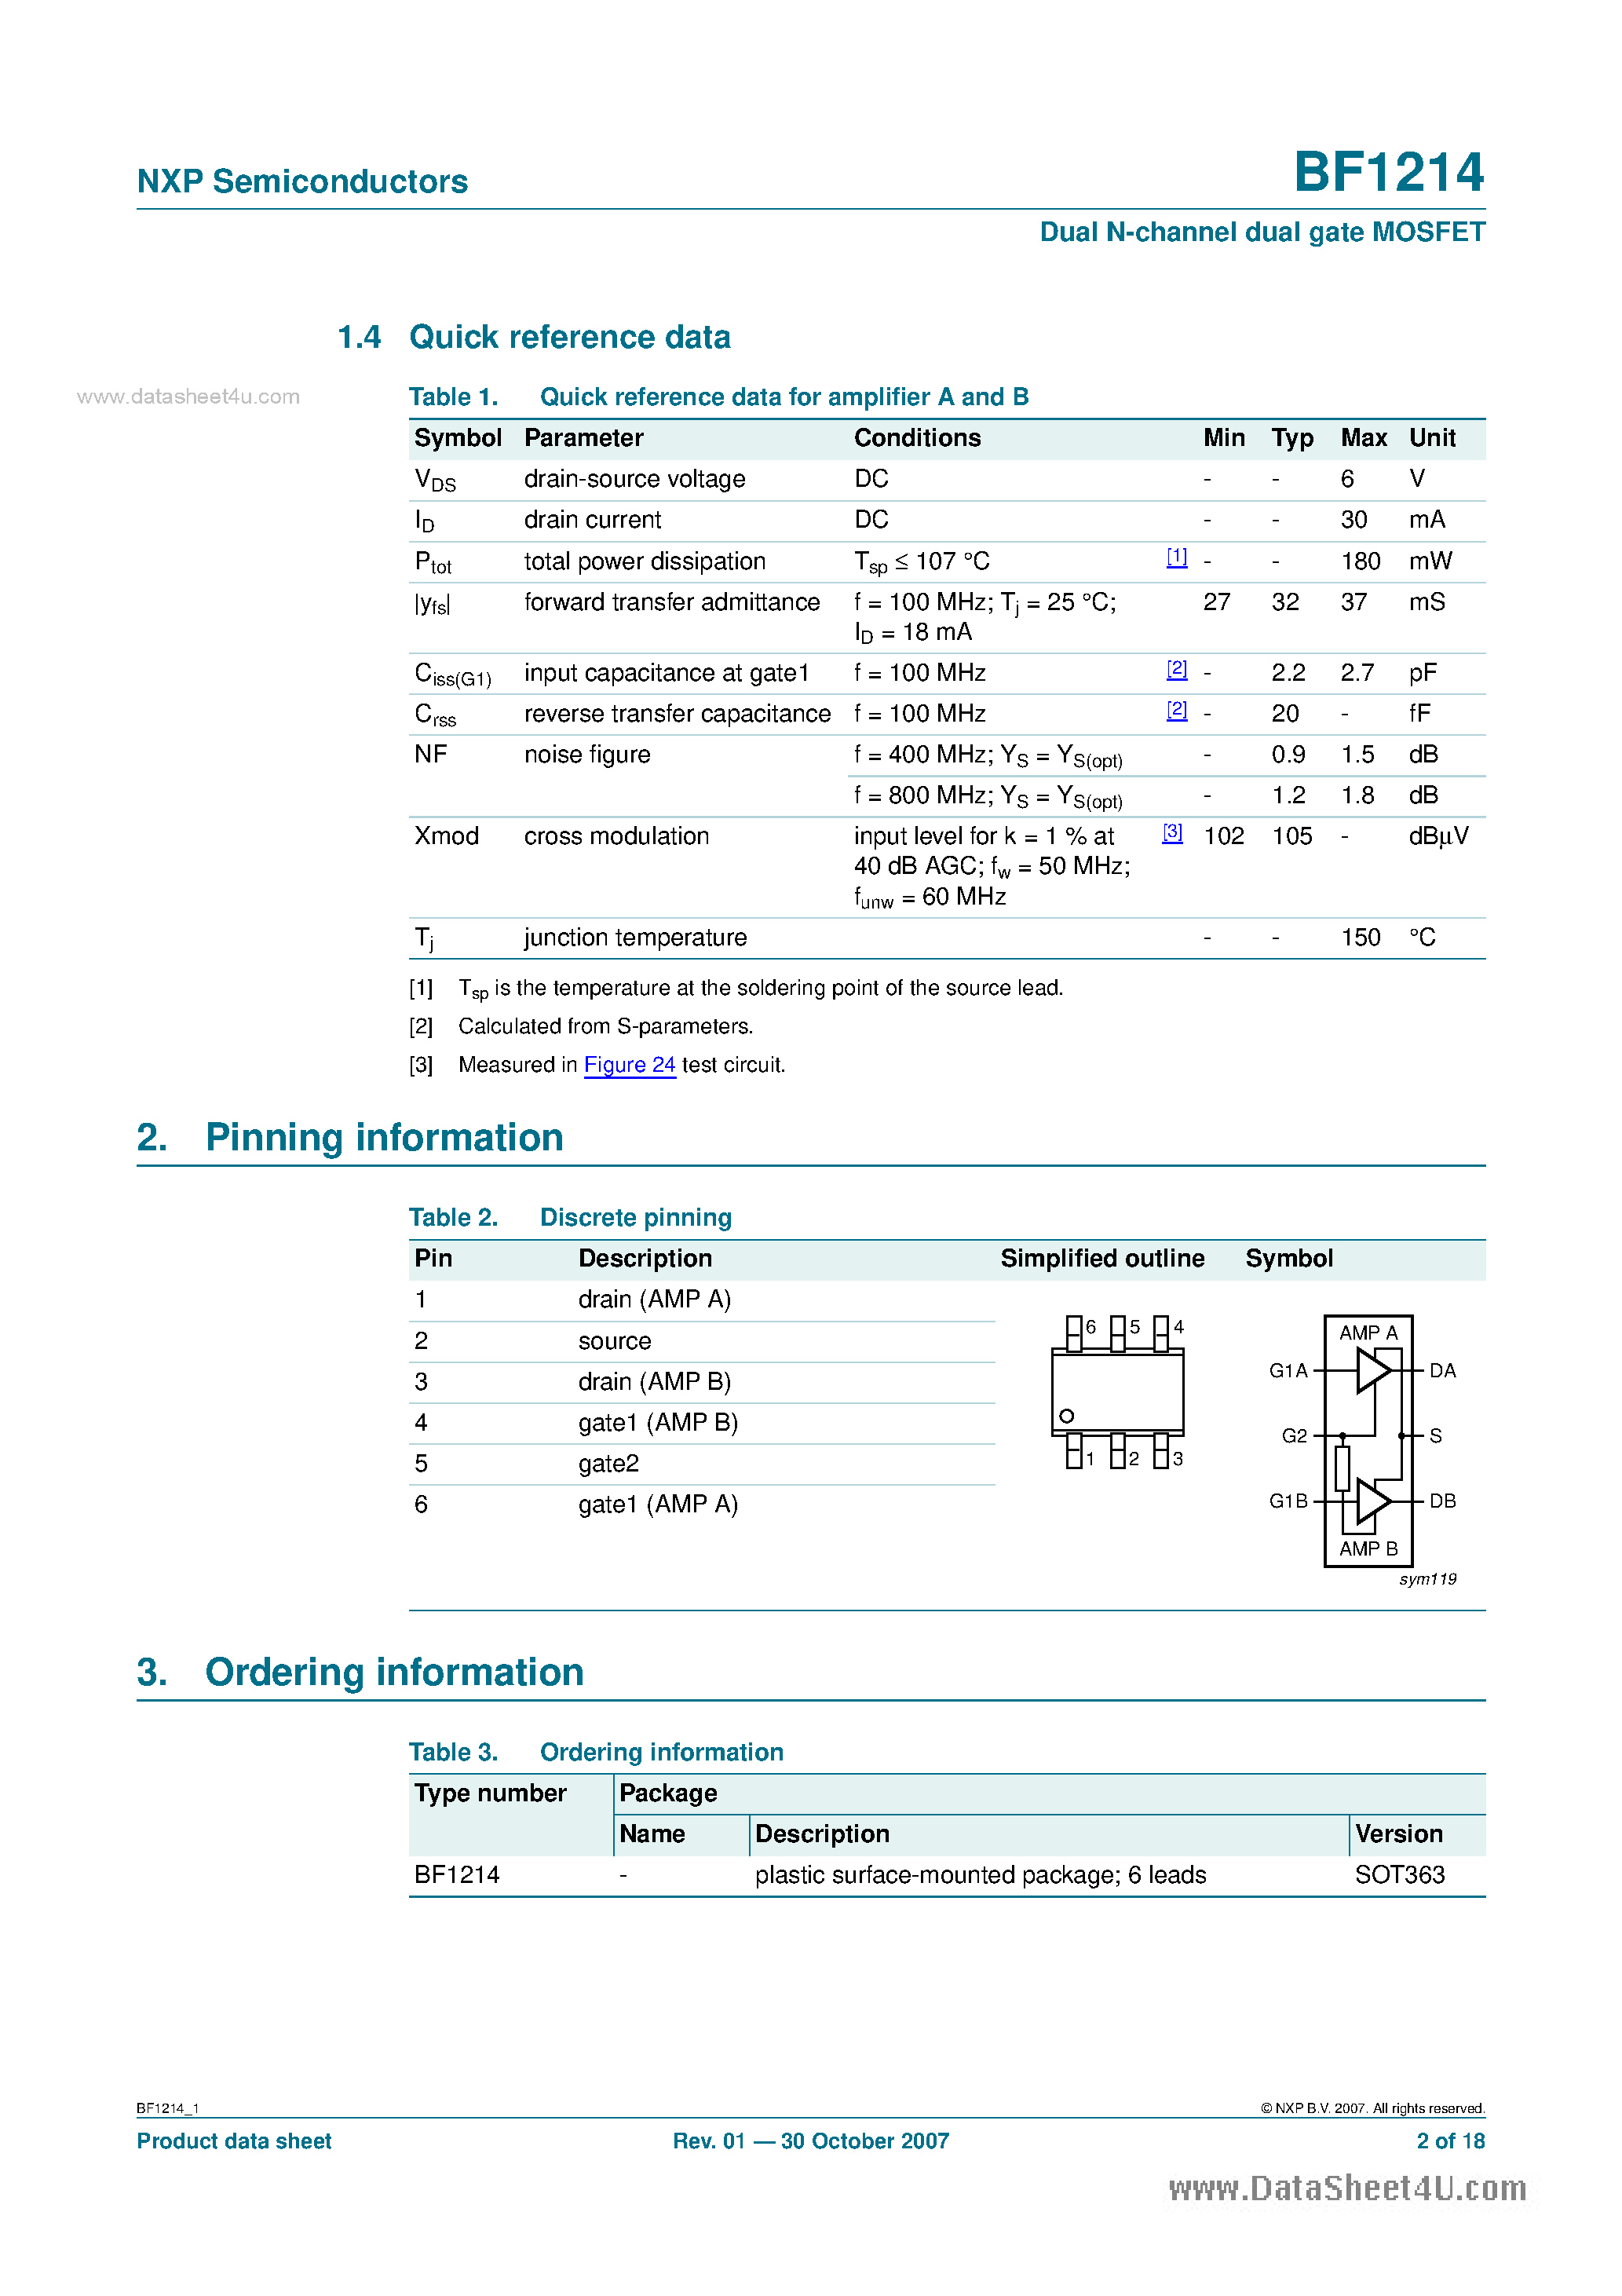 Datasheet BF1214 - Dual N-channel dual gate MOSFET page 2